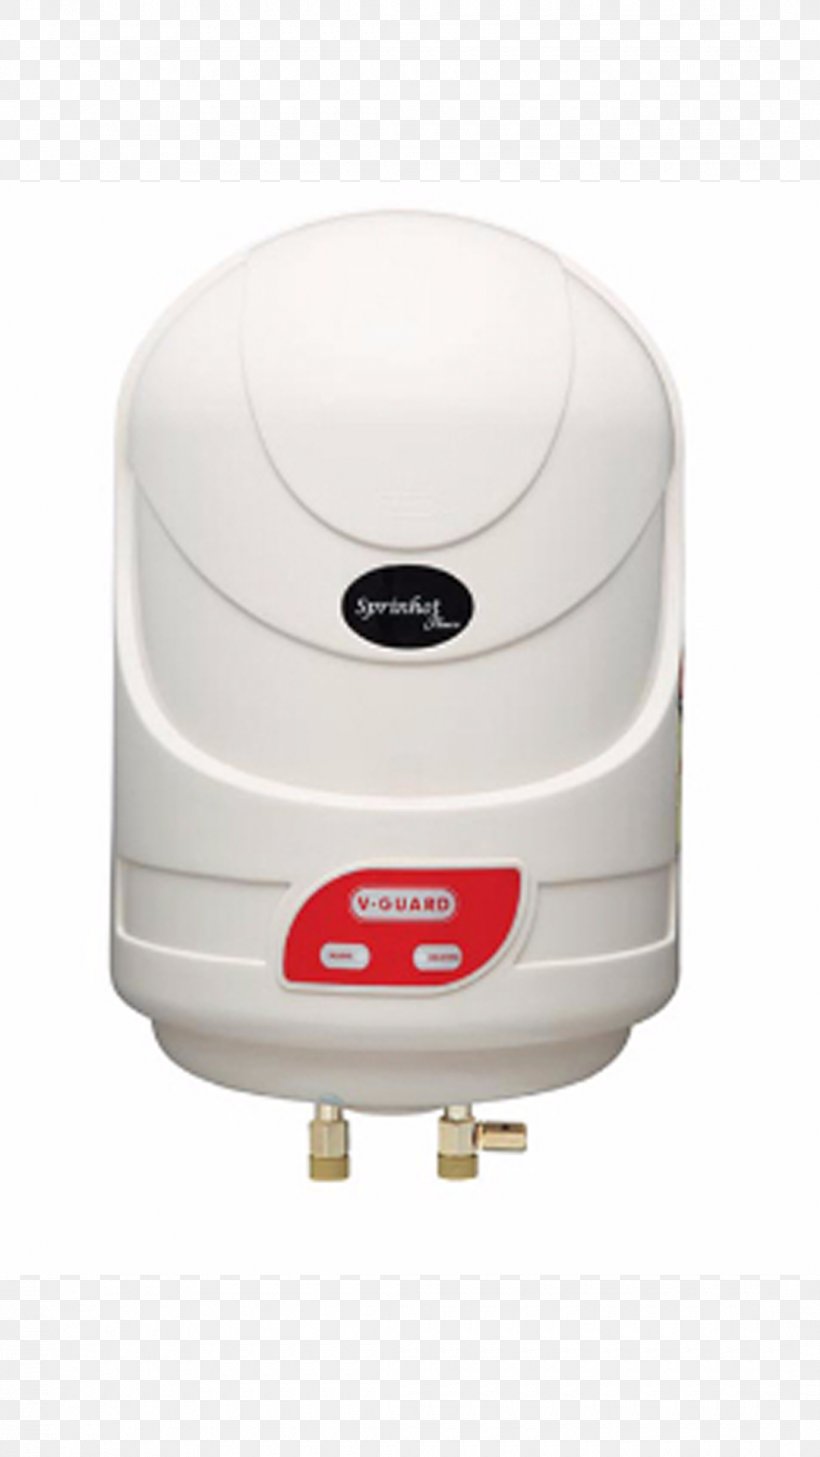 Water Heating V-Guard Industries Electric Heating Geyser Electricity, PNG, 1080x1920px, Water Heating, Electric Heating, Electricity, Energy Conservation, Evaporative Cooler Download Free